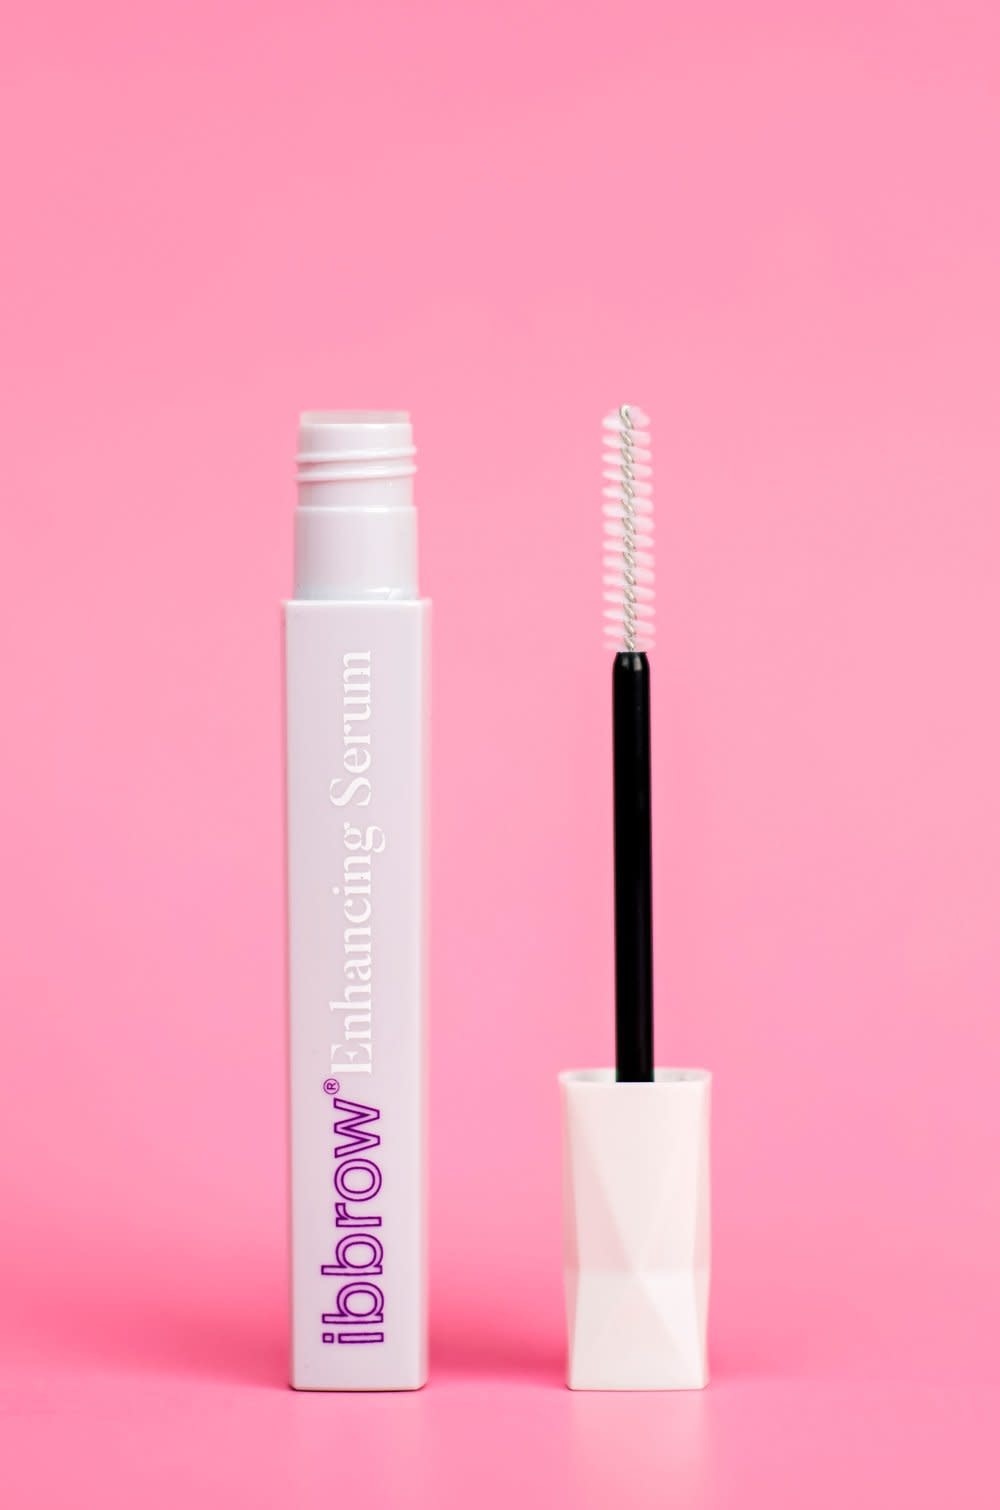 Are Your Brows Looking a Bit Sparse? There’s a Serum for That! 